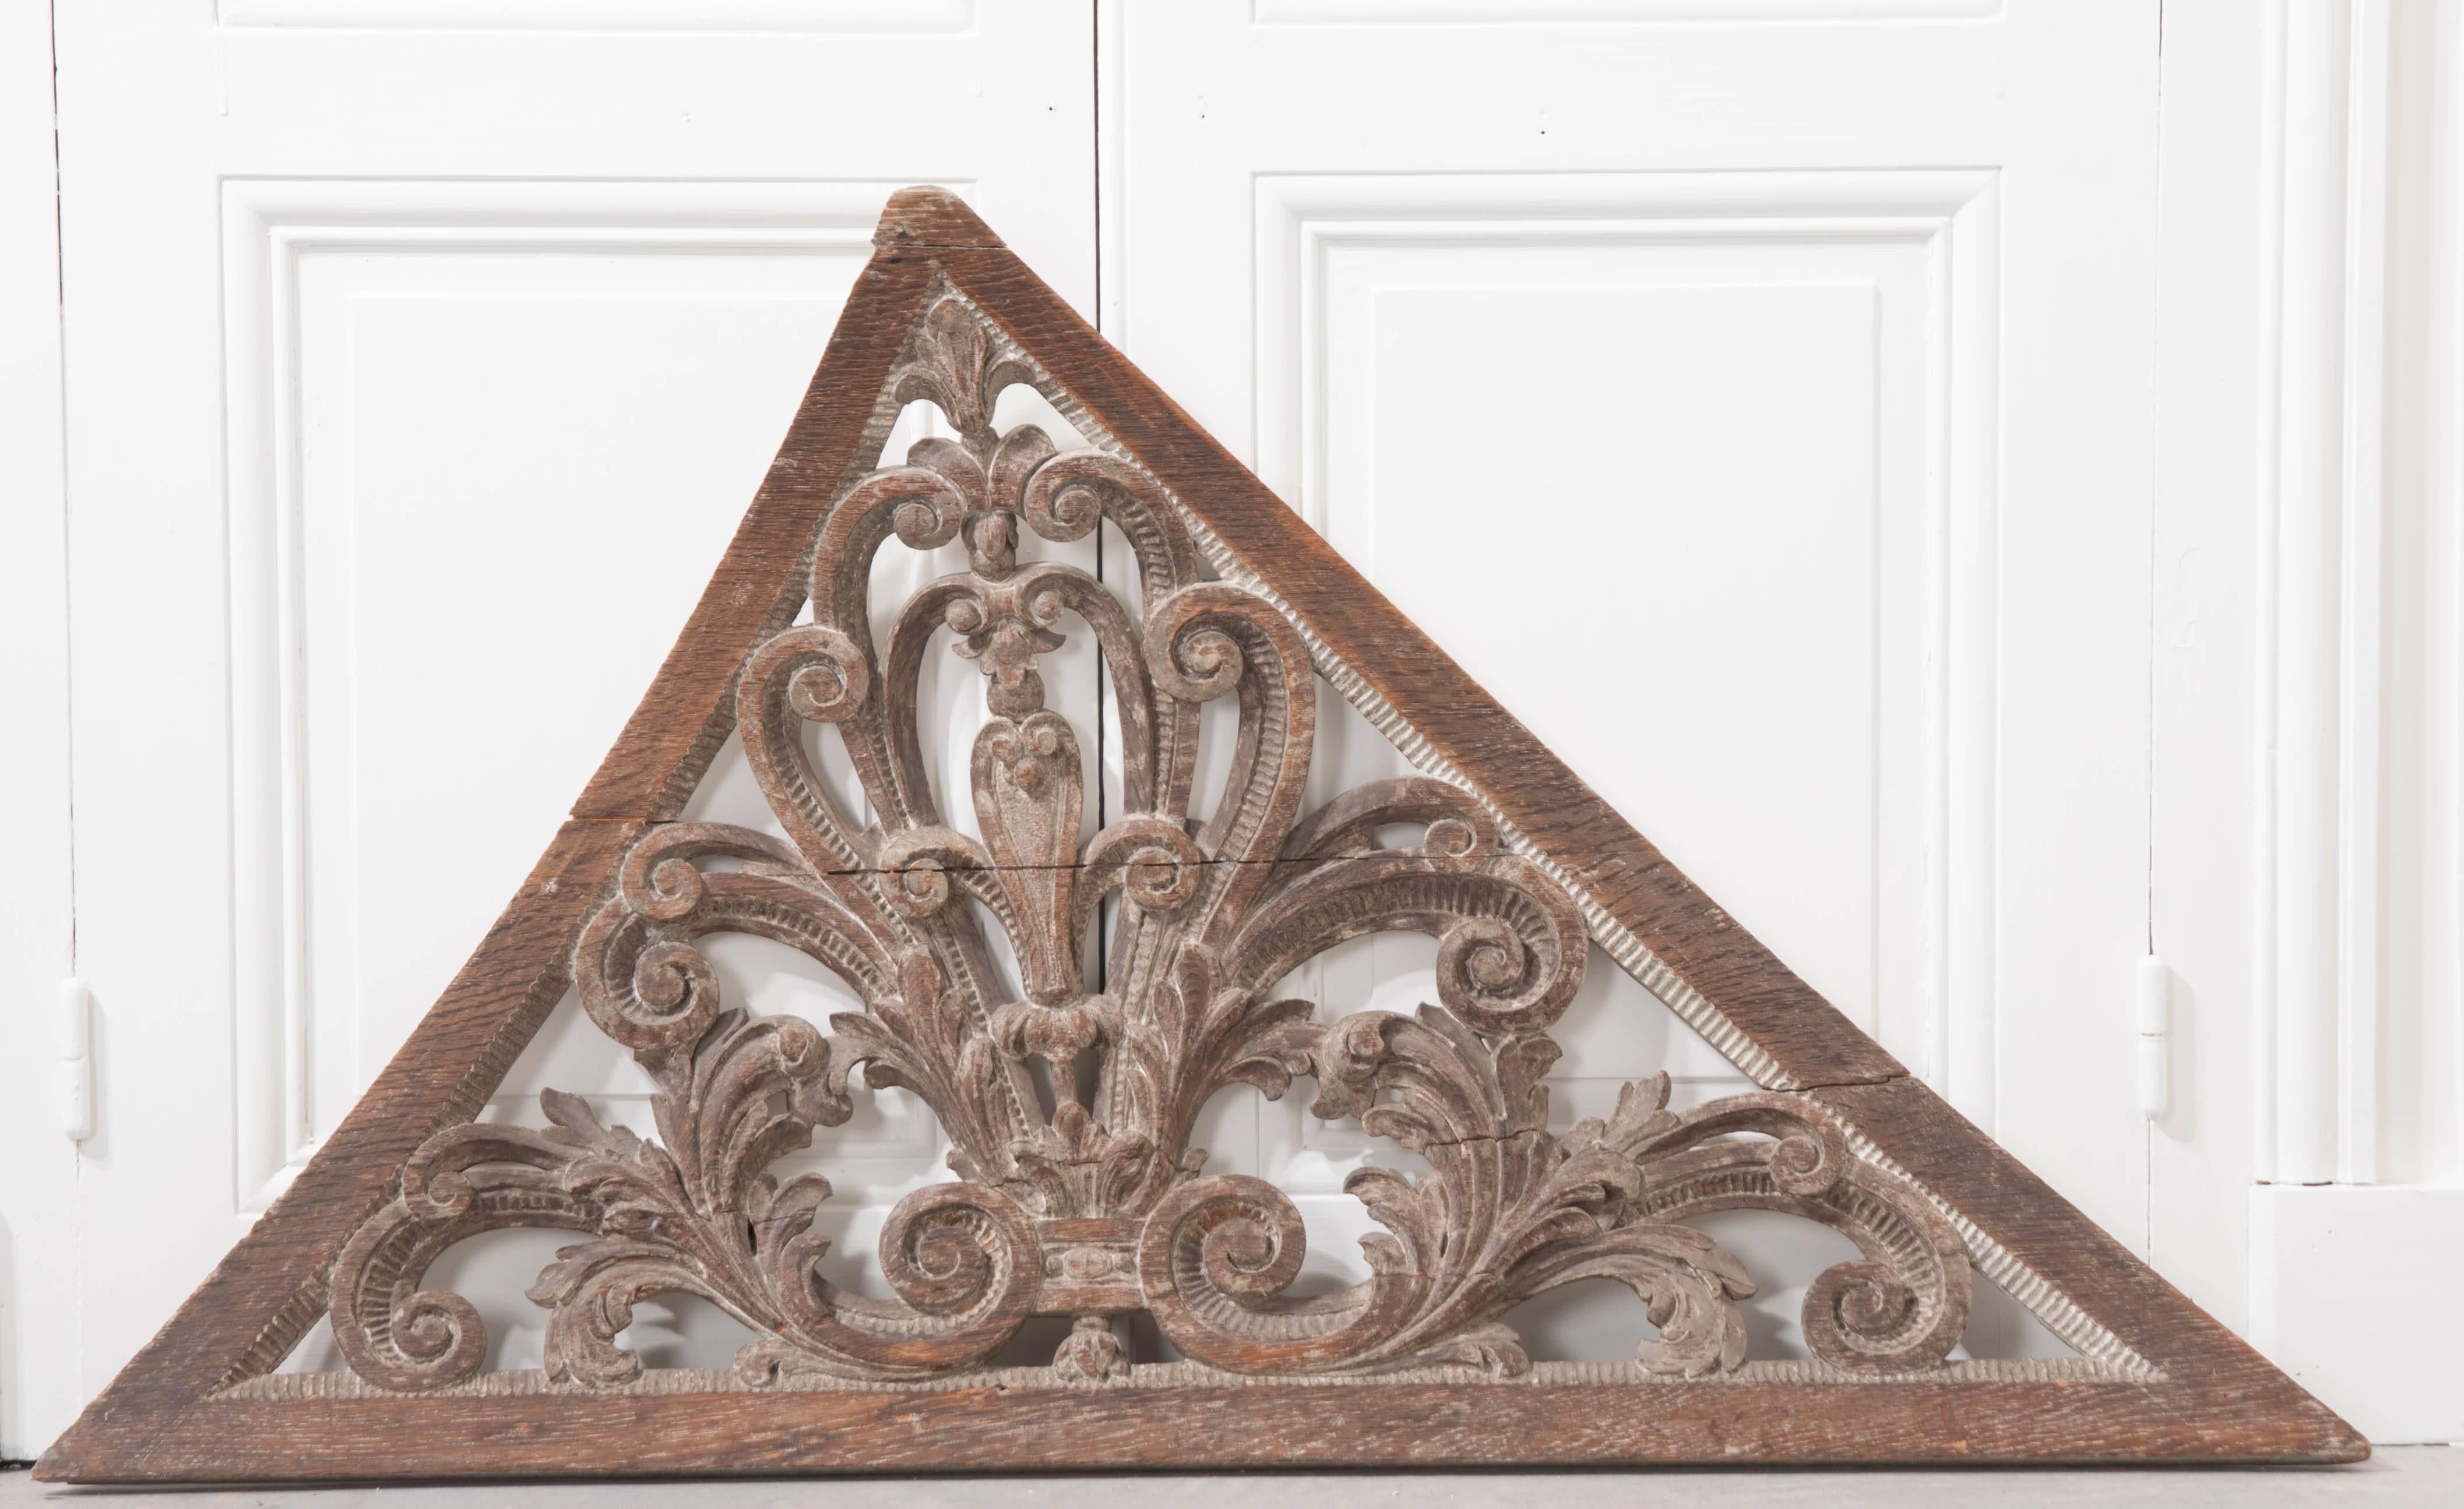 A masterfully carved stairwell ornament from the early part of the 18th century, Sweden. Dating to 1730, this curved decorative detail was once a part of a grand staircase. The ornament is adorned with wonderfully carved scrolls and acanthus leaves.